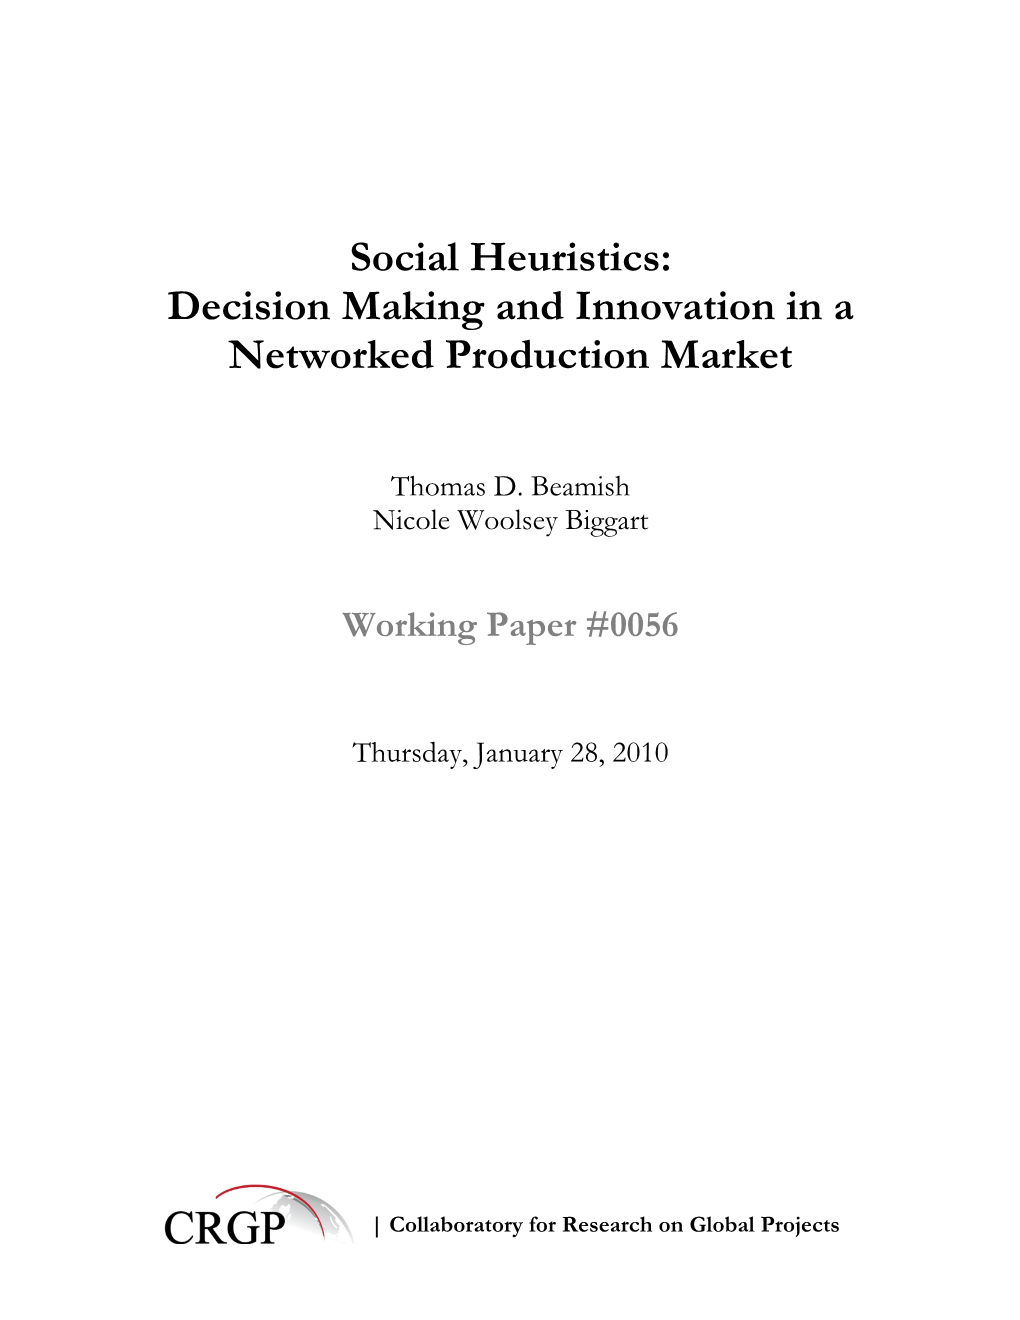 Social Heuristics: Decision Making and Innovation in a Networked Production Market